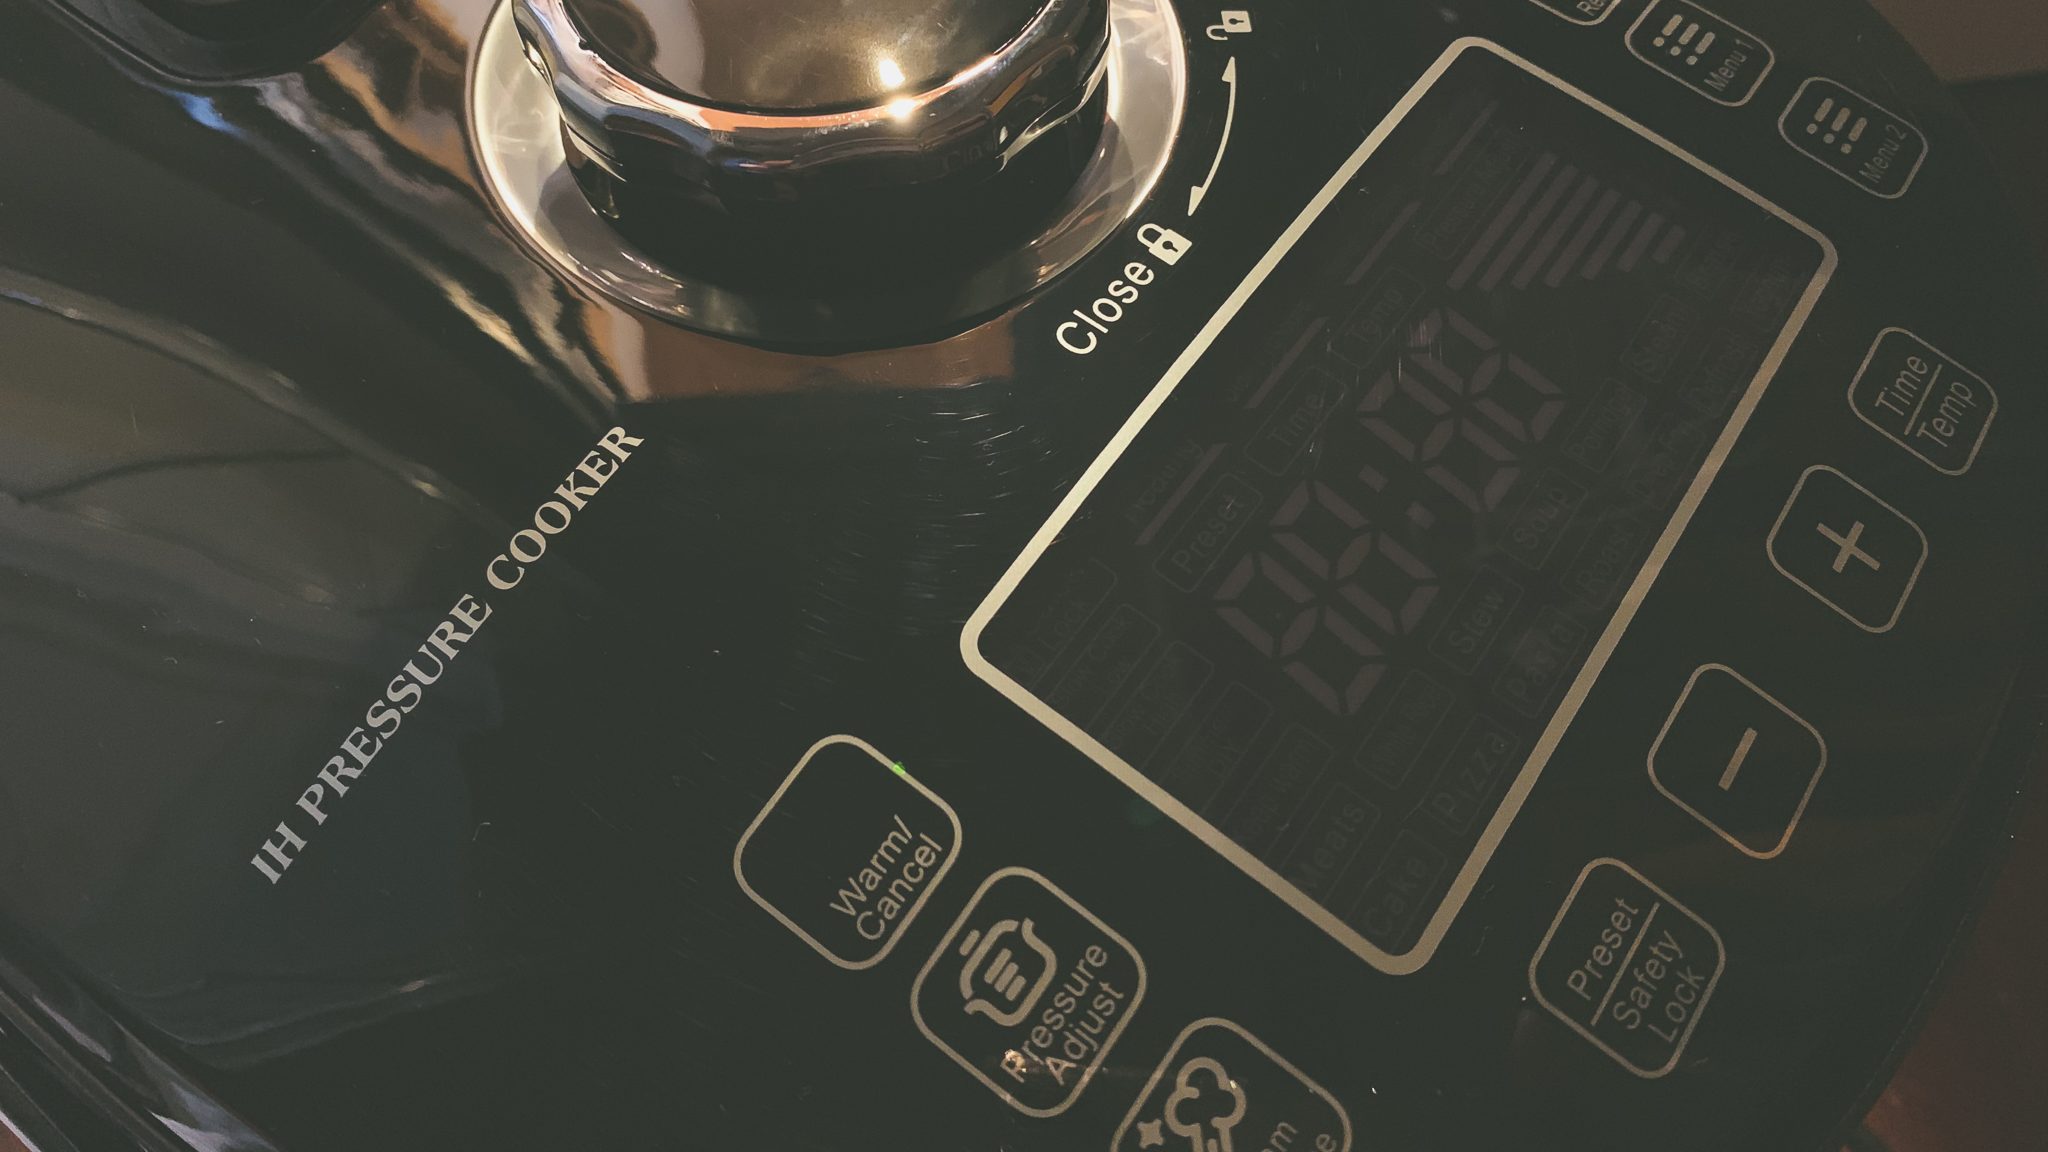 Why We Have an Optimum Pressure-Cook Pro